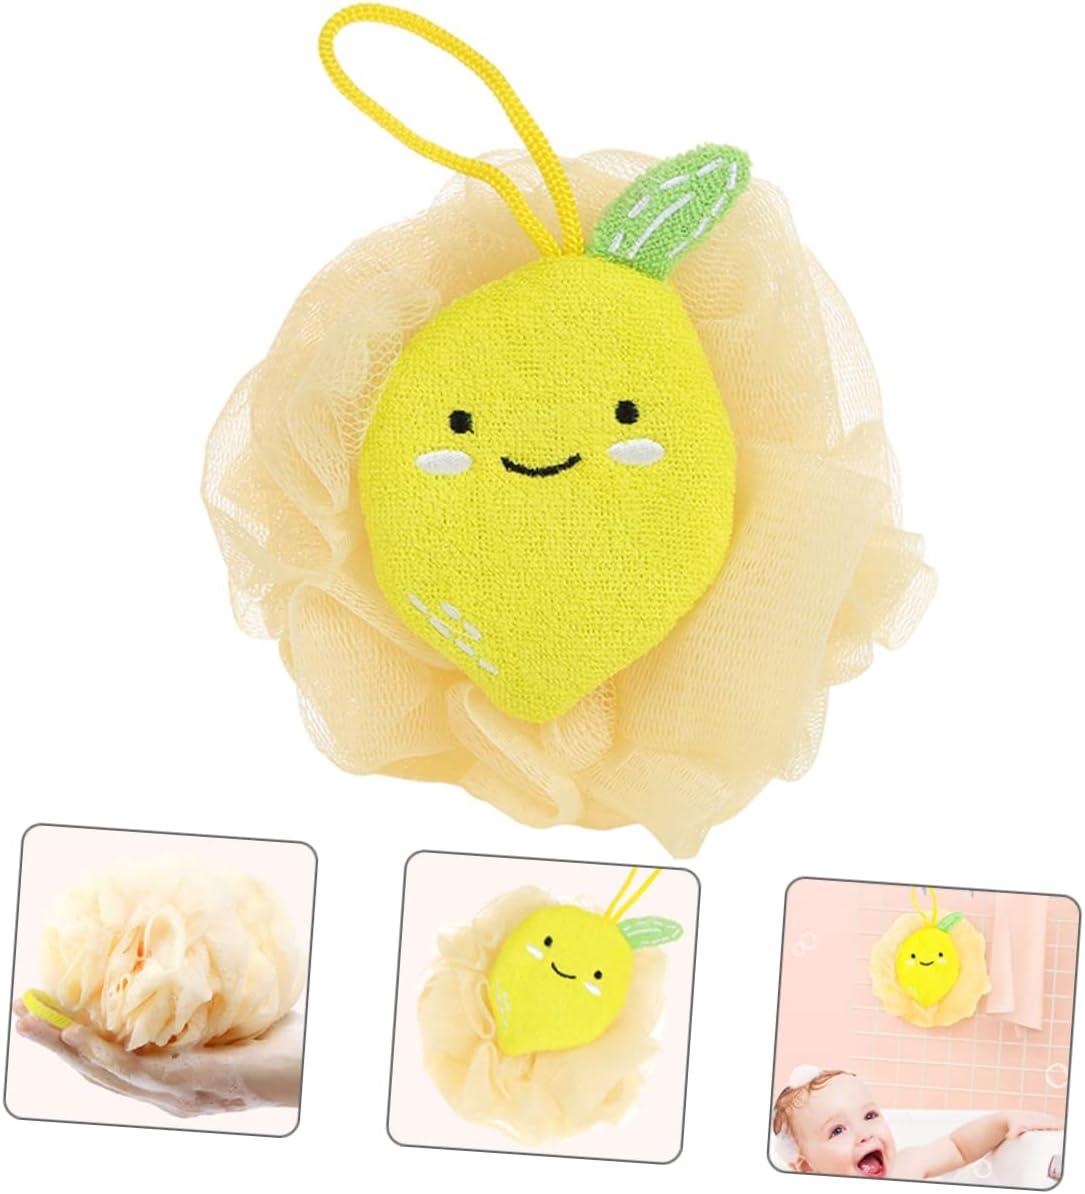 Toyvian Bath Ball Loofah Dish Sponge Sponges for Cleaning Baby